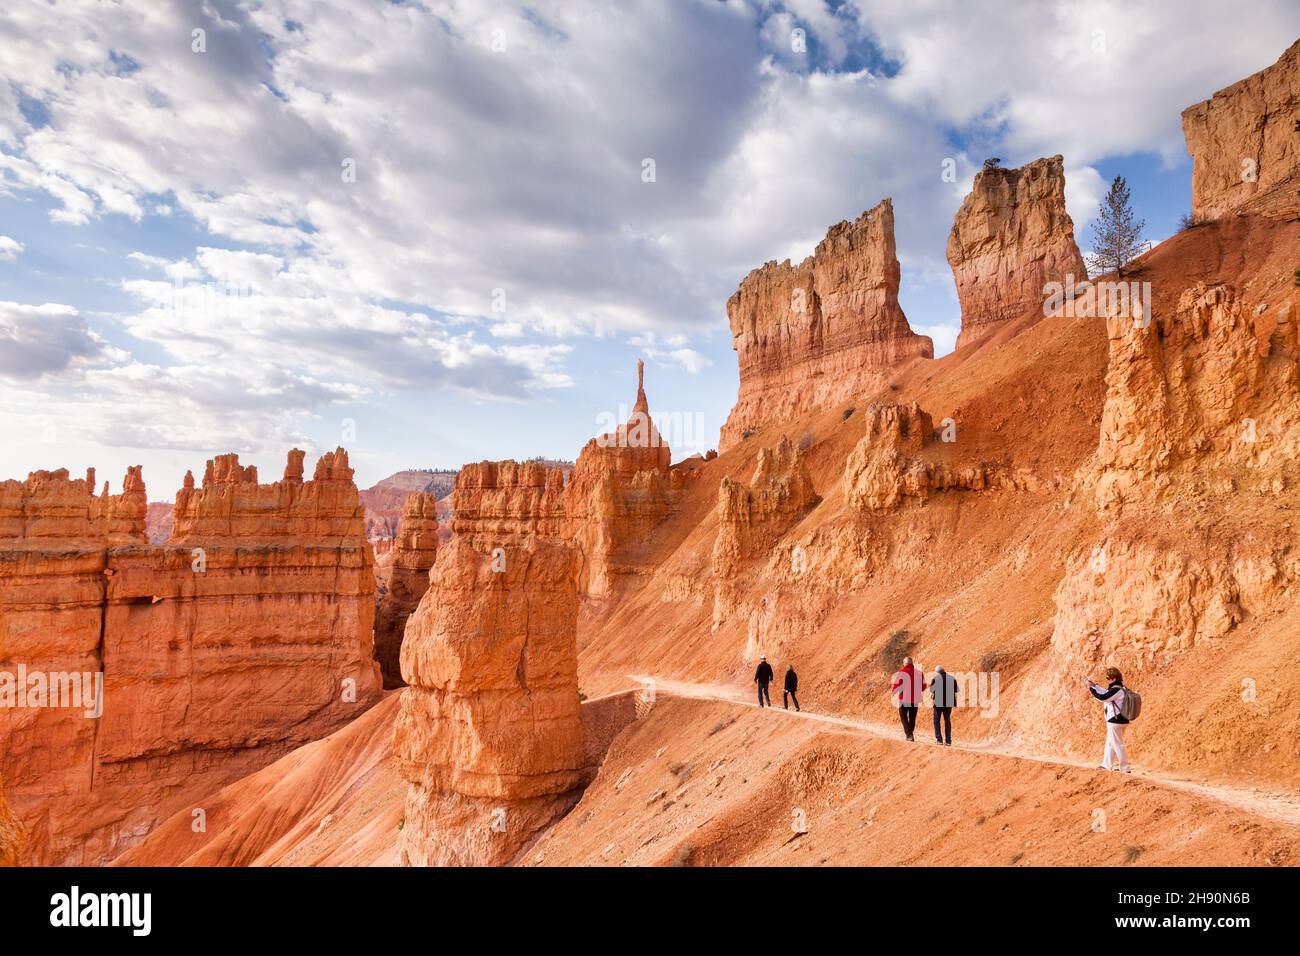 21 April 2014: Bryce Canyon, Utah, USA - Visitors on a walking trail in Bryce Canyon National Park, Utah, on a Spring morning. Stock Photo